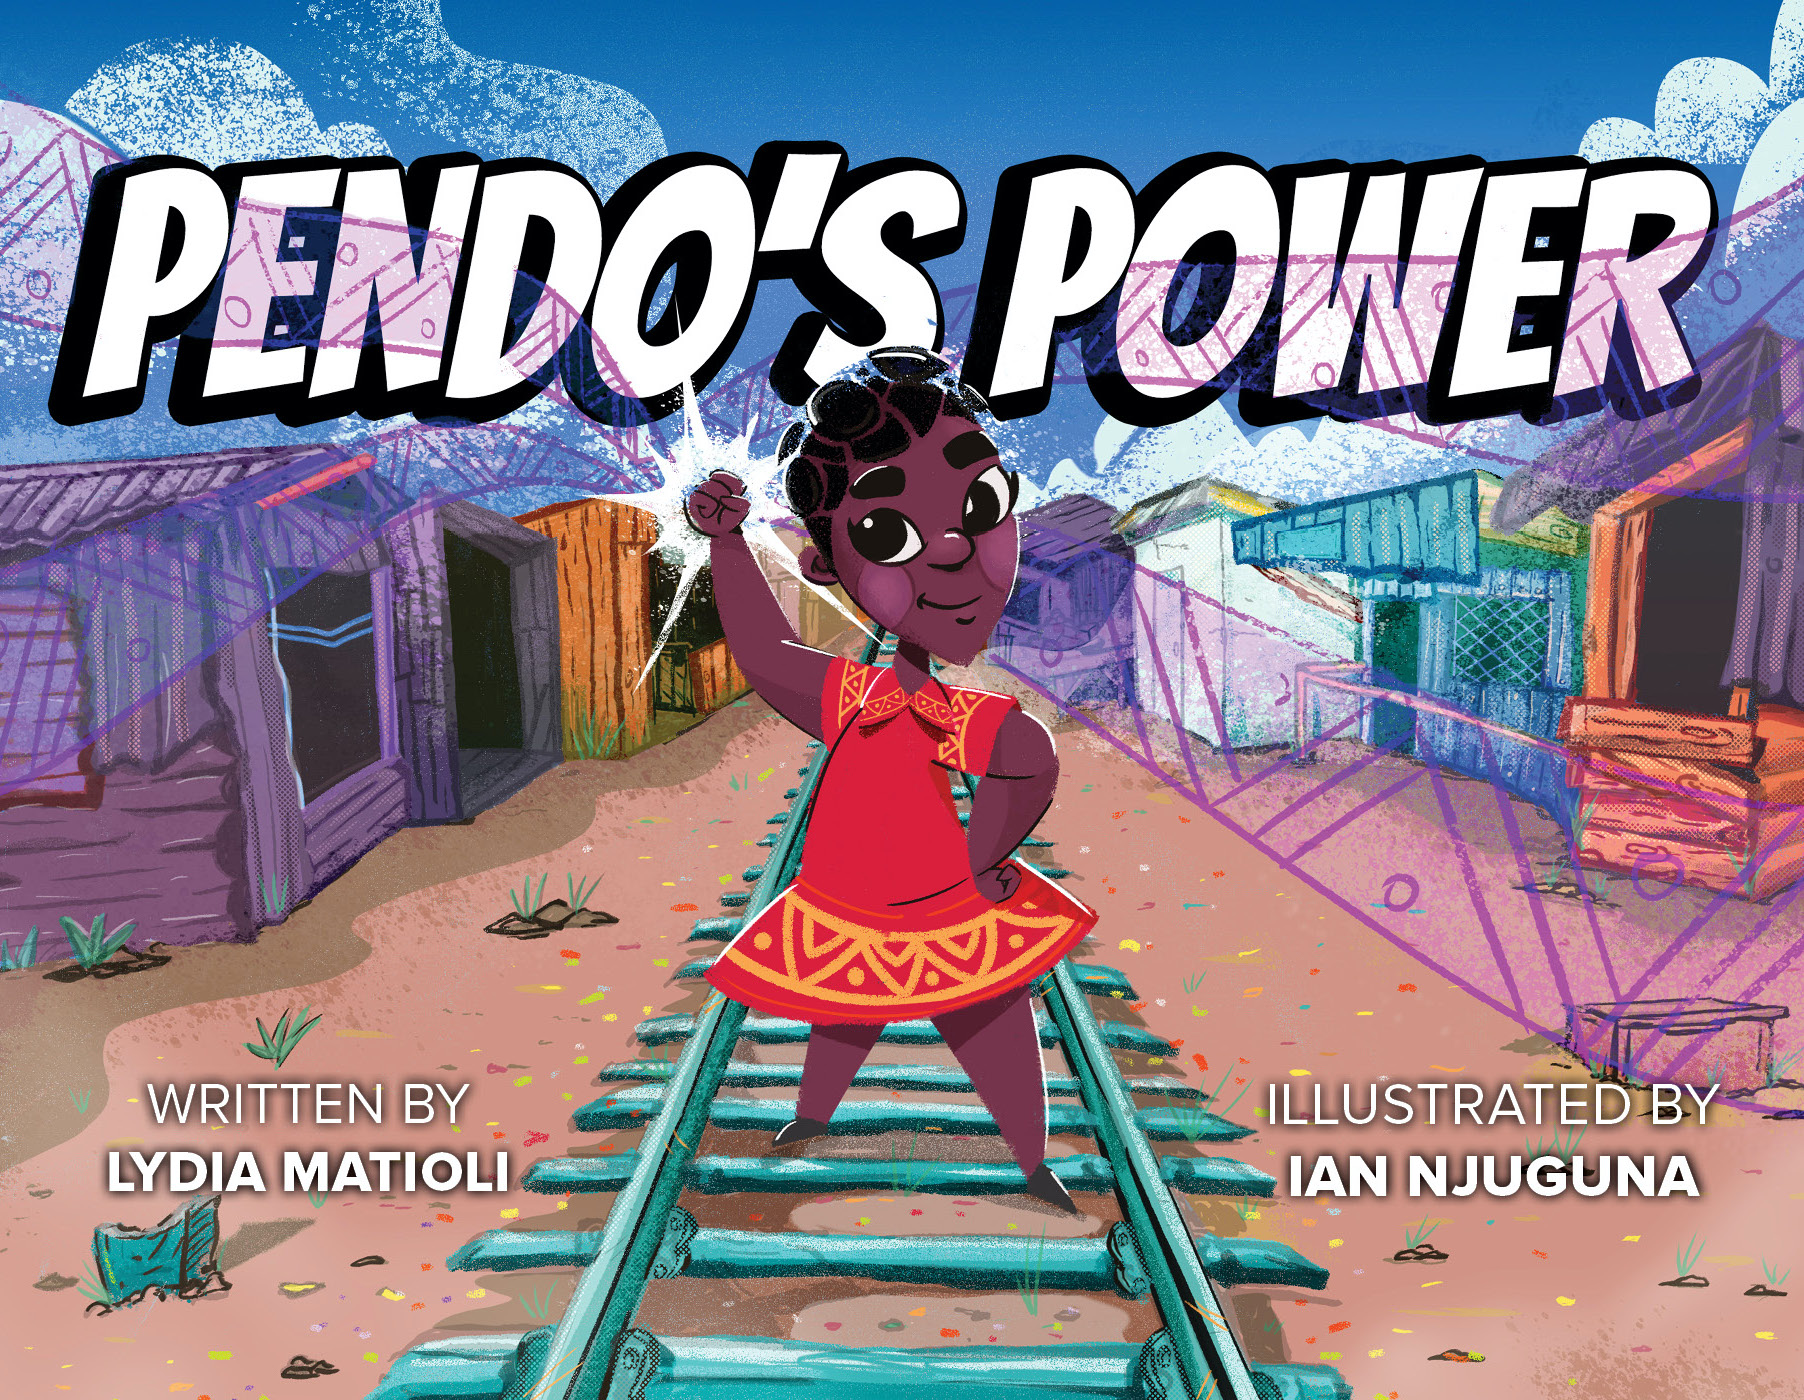 PENDO'S POWER TEACHES LIFESAVING EDUCATION AND EMPOWERING RESOURCES THAT PREVENT CHILD SEXUAL ABUSE.